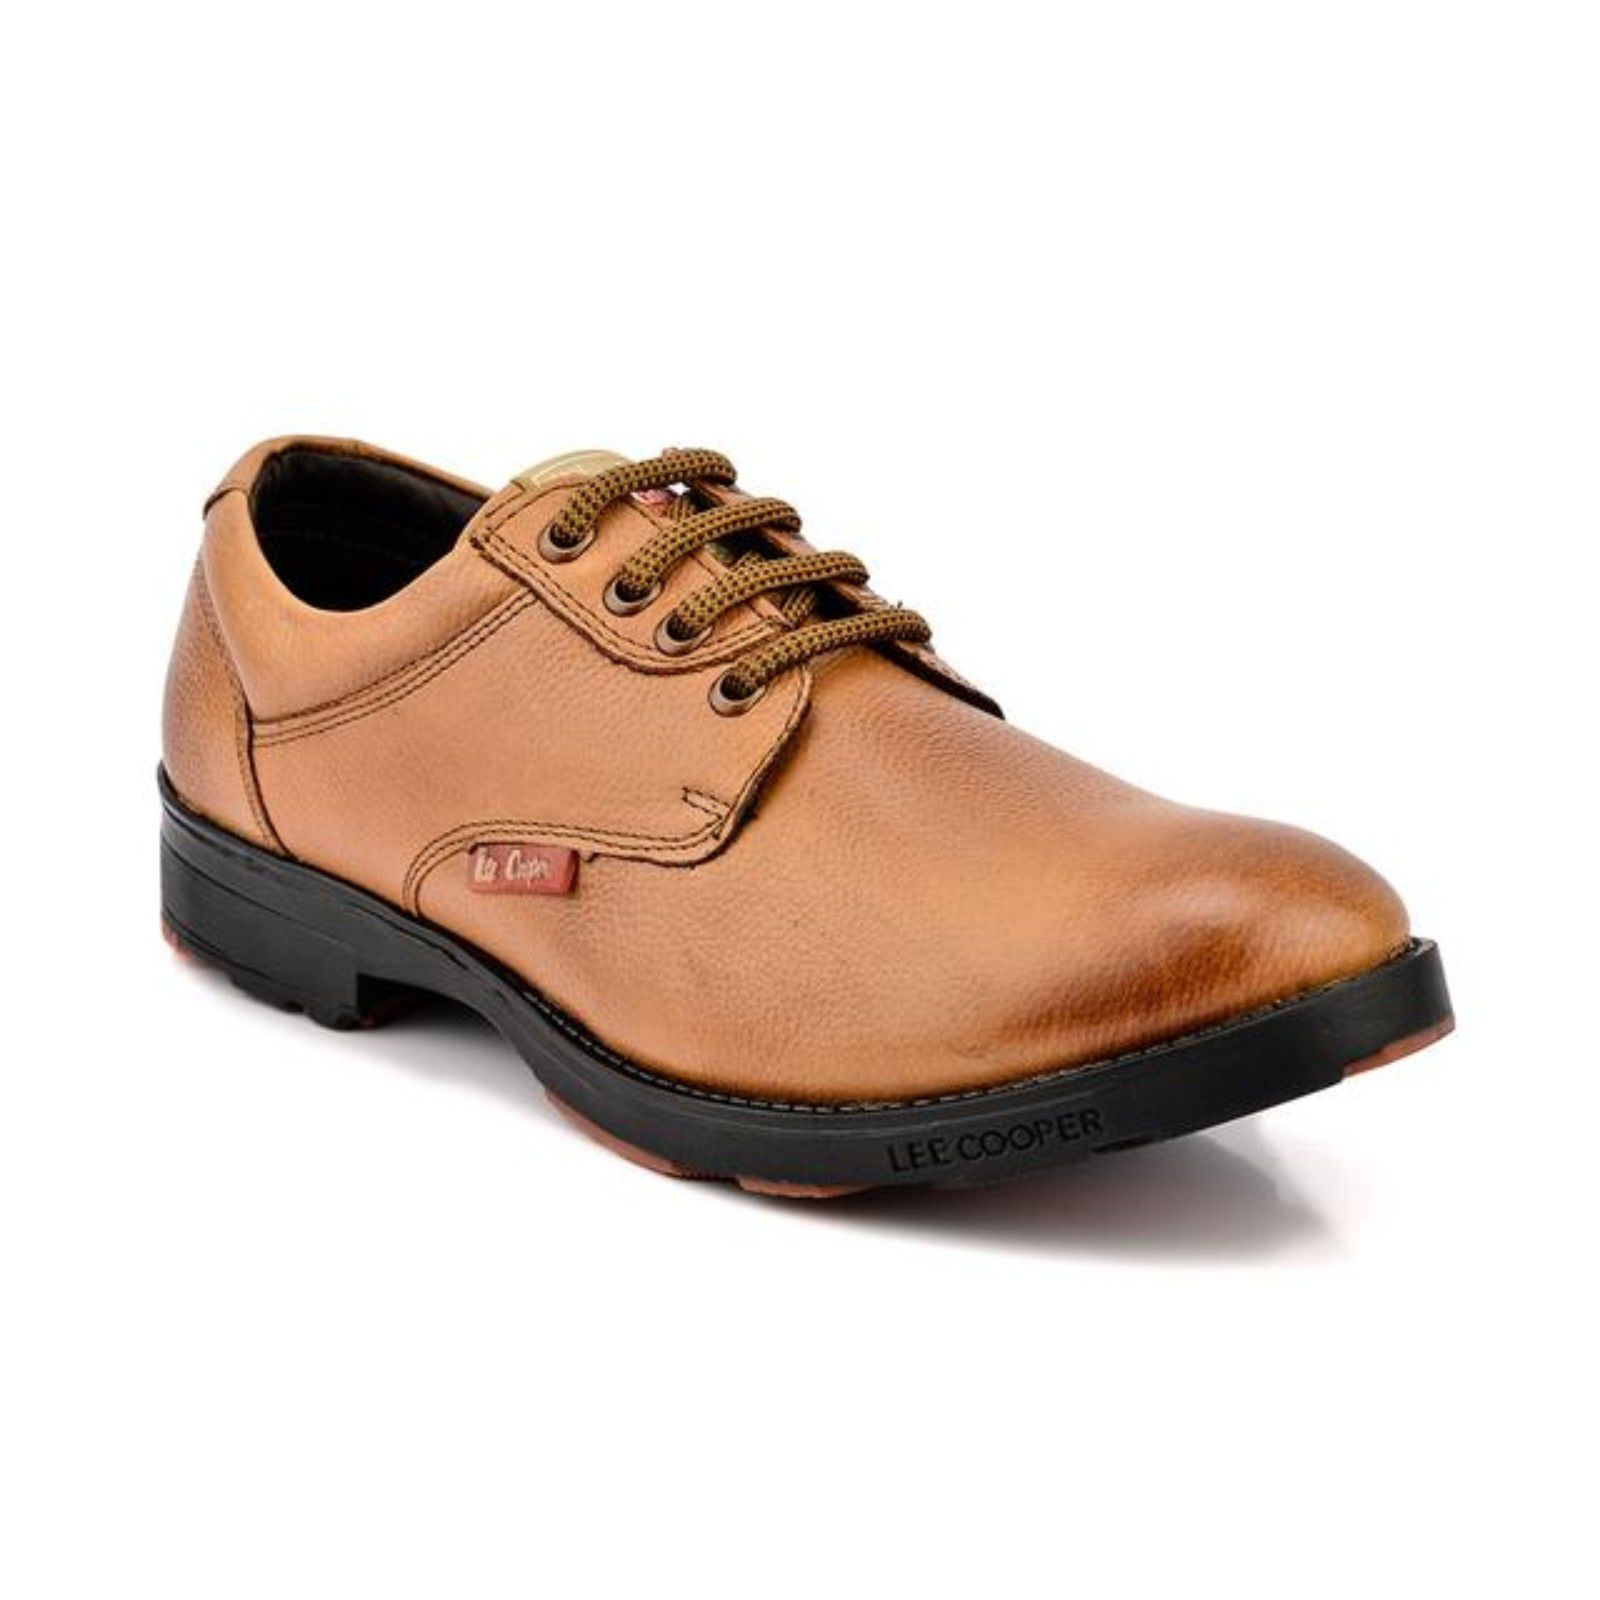 Lee Cooper Lifestyle Tan Casual Shoes - Buy Lee Cooper Lifestyle Tan ...